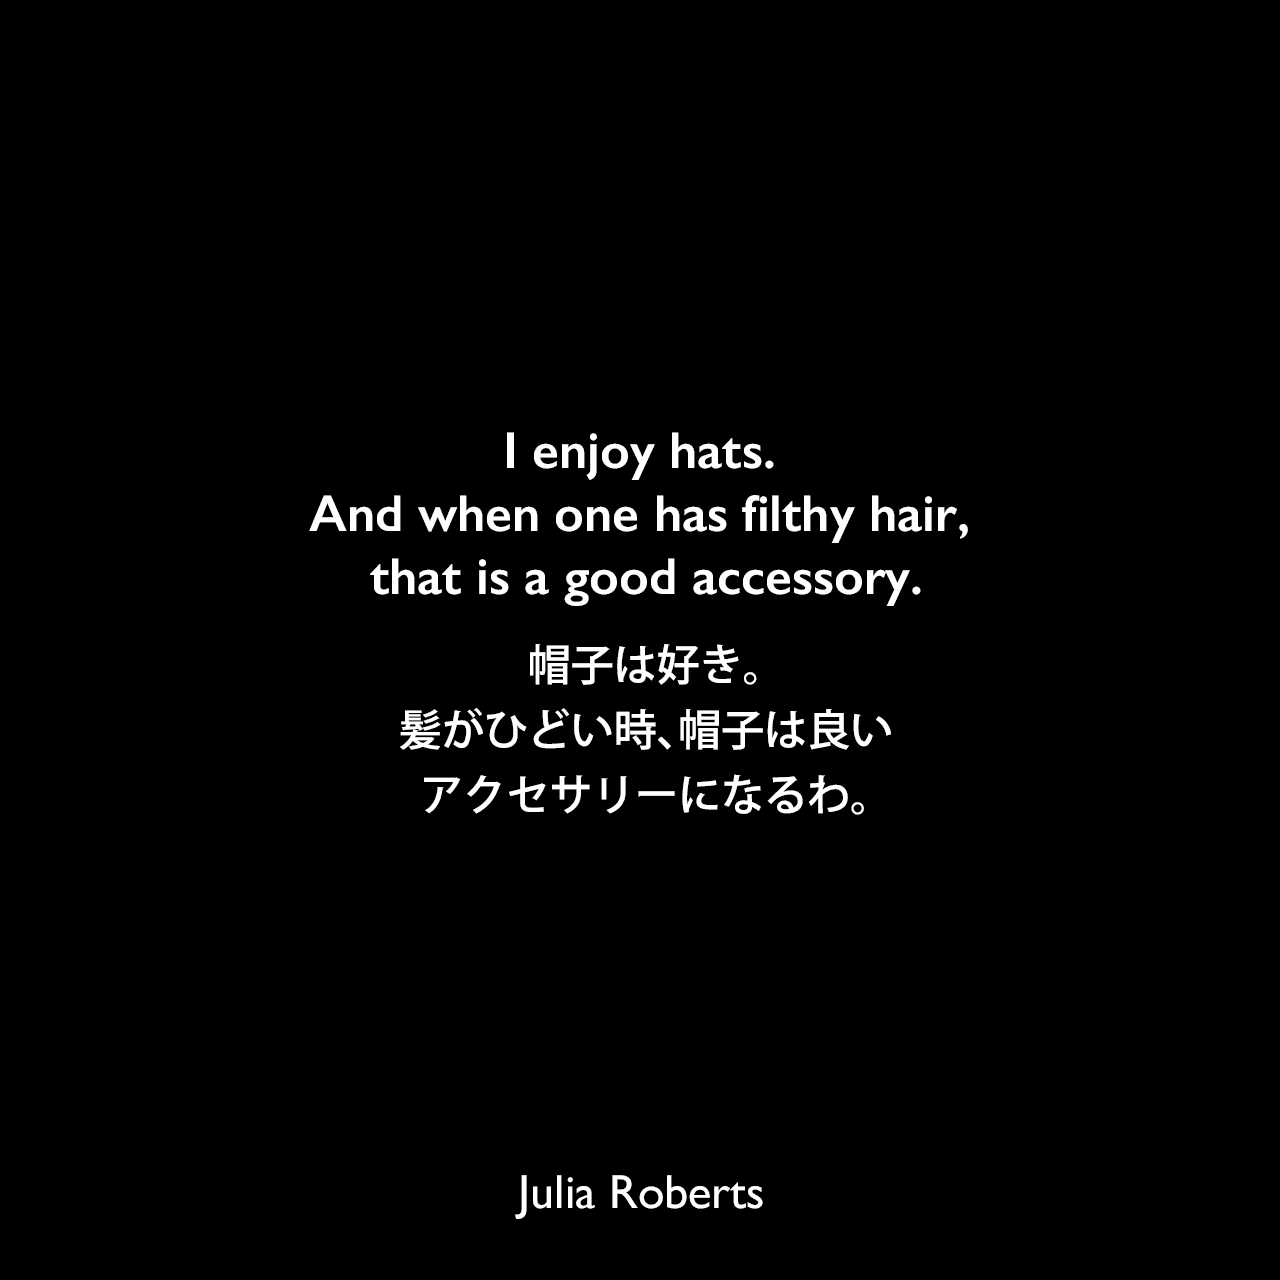 I enjoy hats. And when one has filthy hair, that is a good accessory.帽子は好き。髪がひどい時、帽子は良いアクセサリーになるわ。Julia Roberts